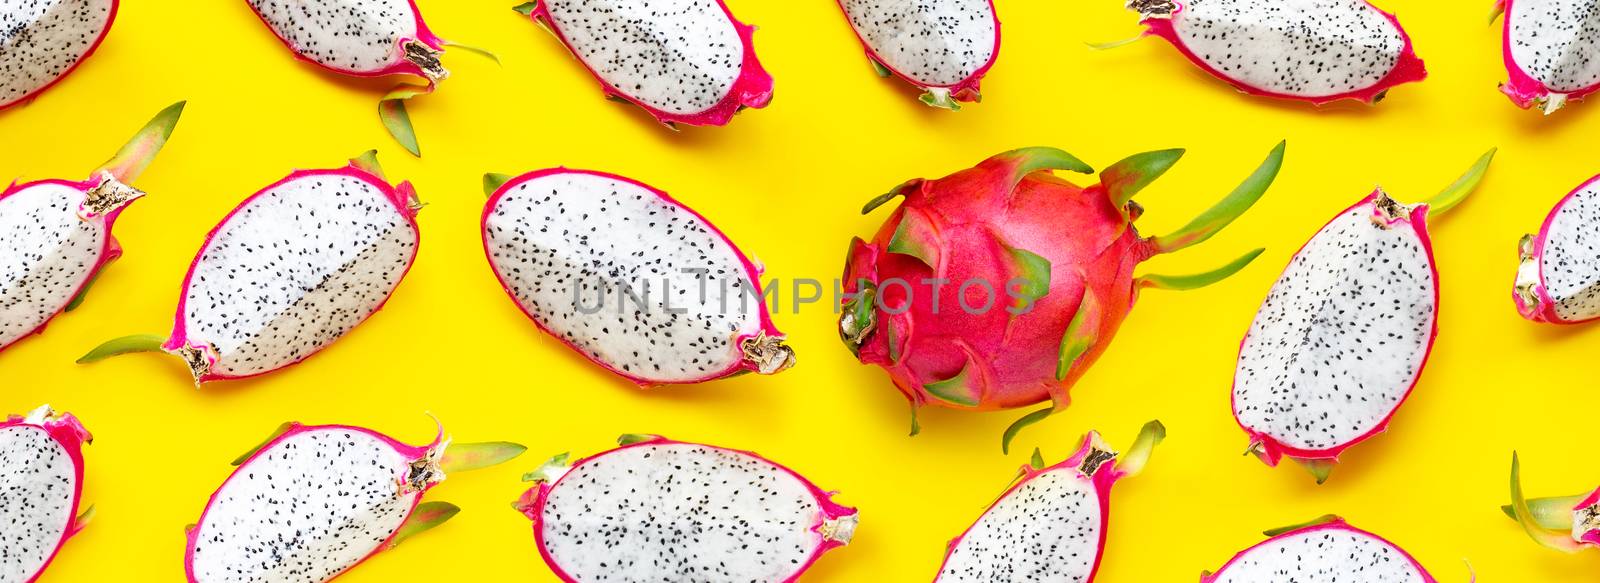 Ripe dragonfruit or pitahaya slices on yellow background. Top view